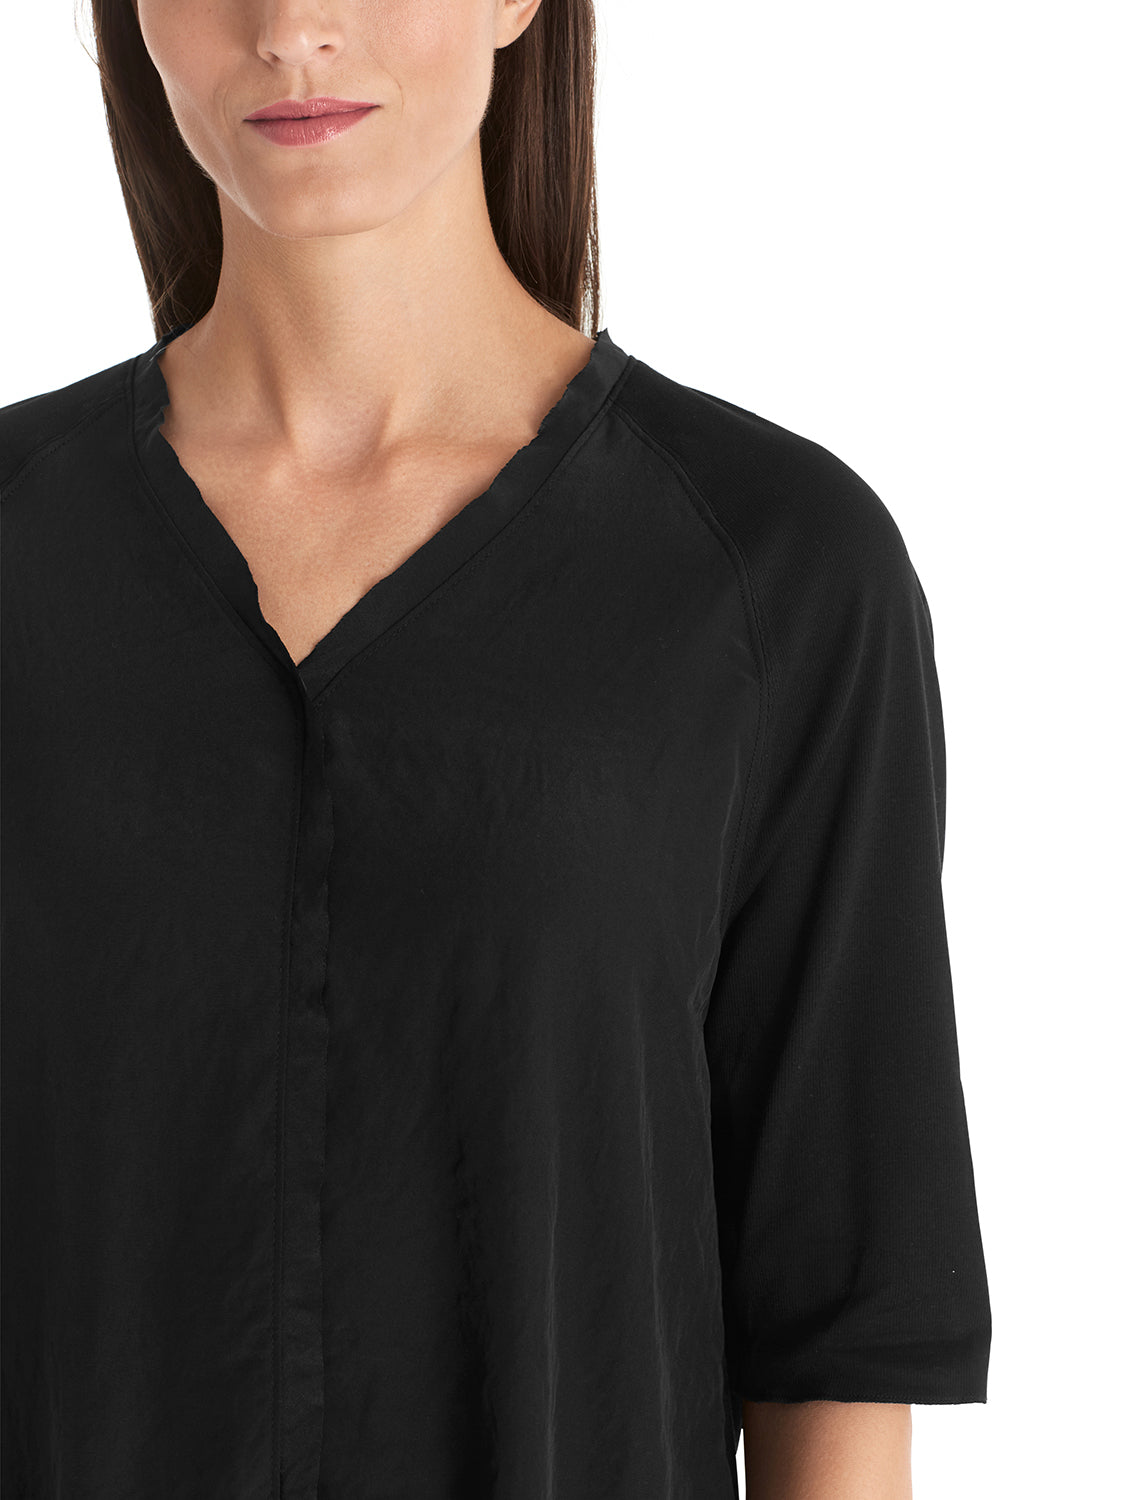 Marc Cain Blouse With Raglan And A-Line WS 55.04 J67